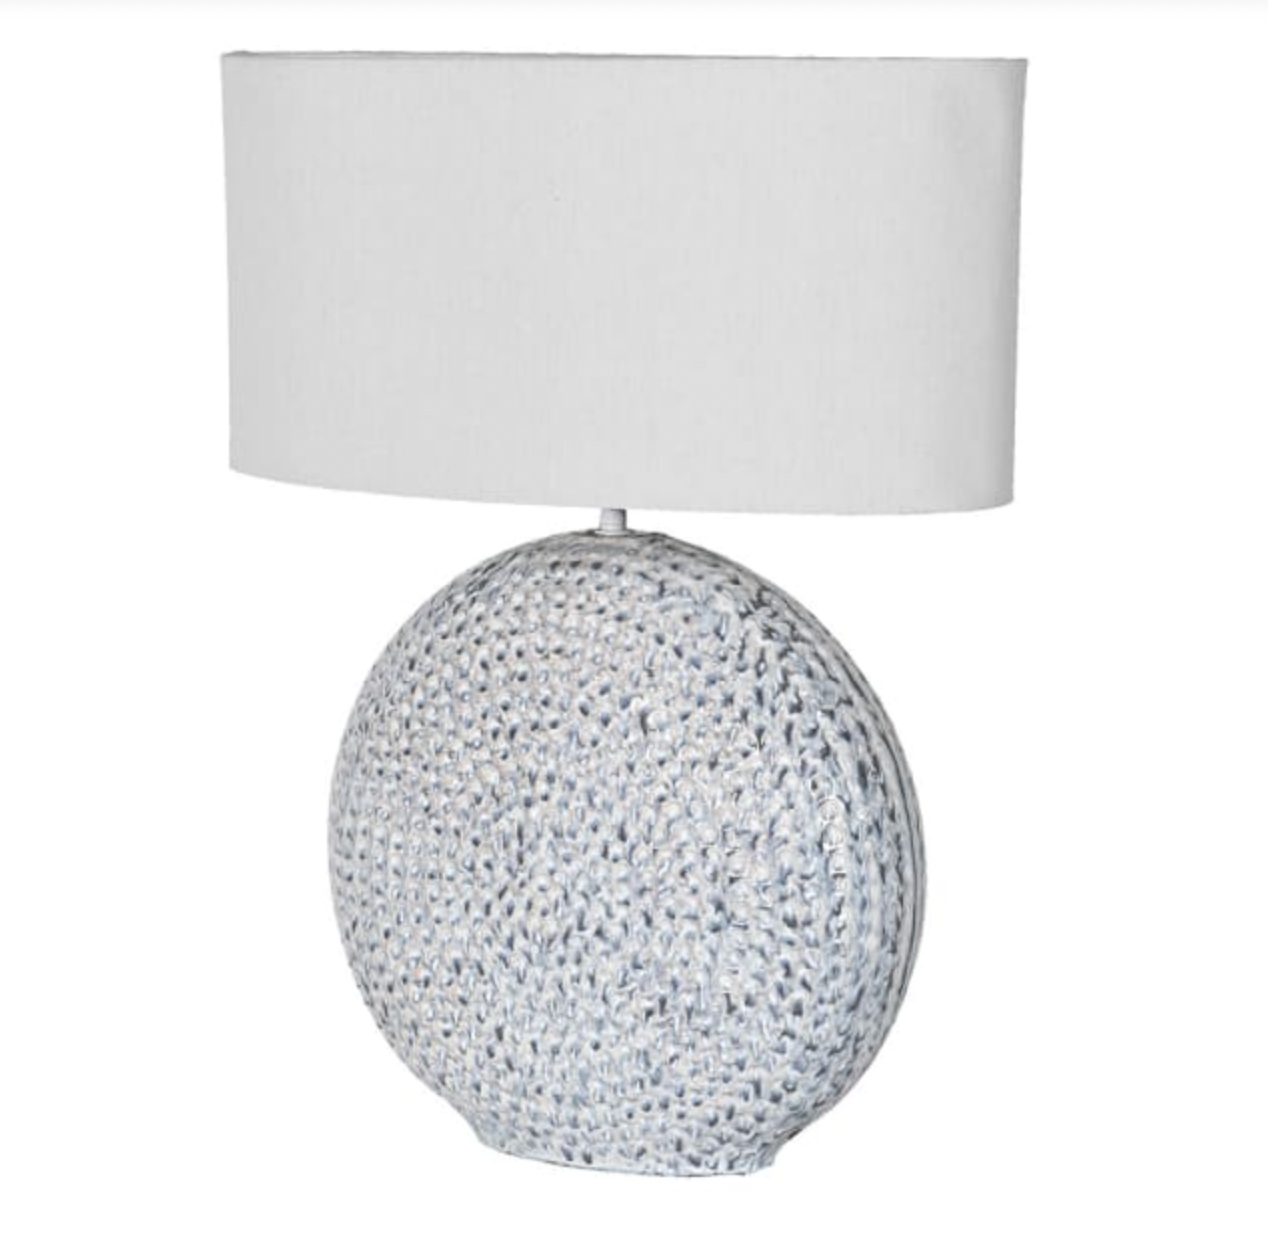 Textured Speckled Blue Lamp